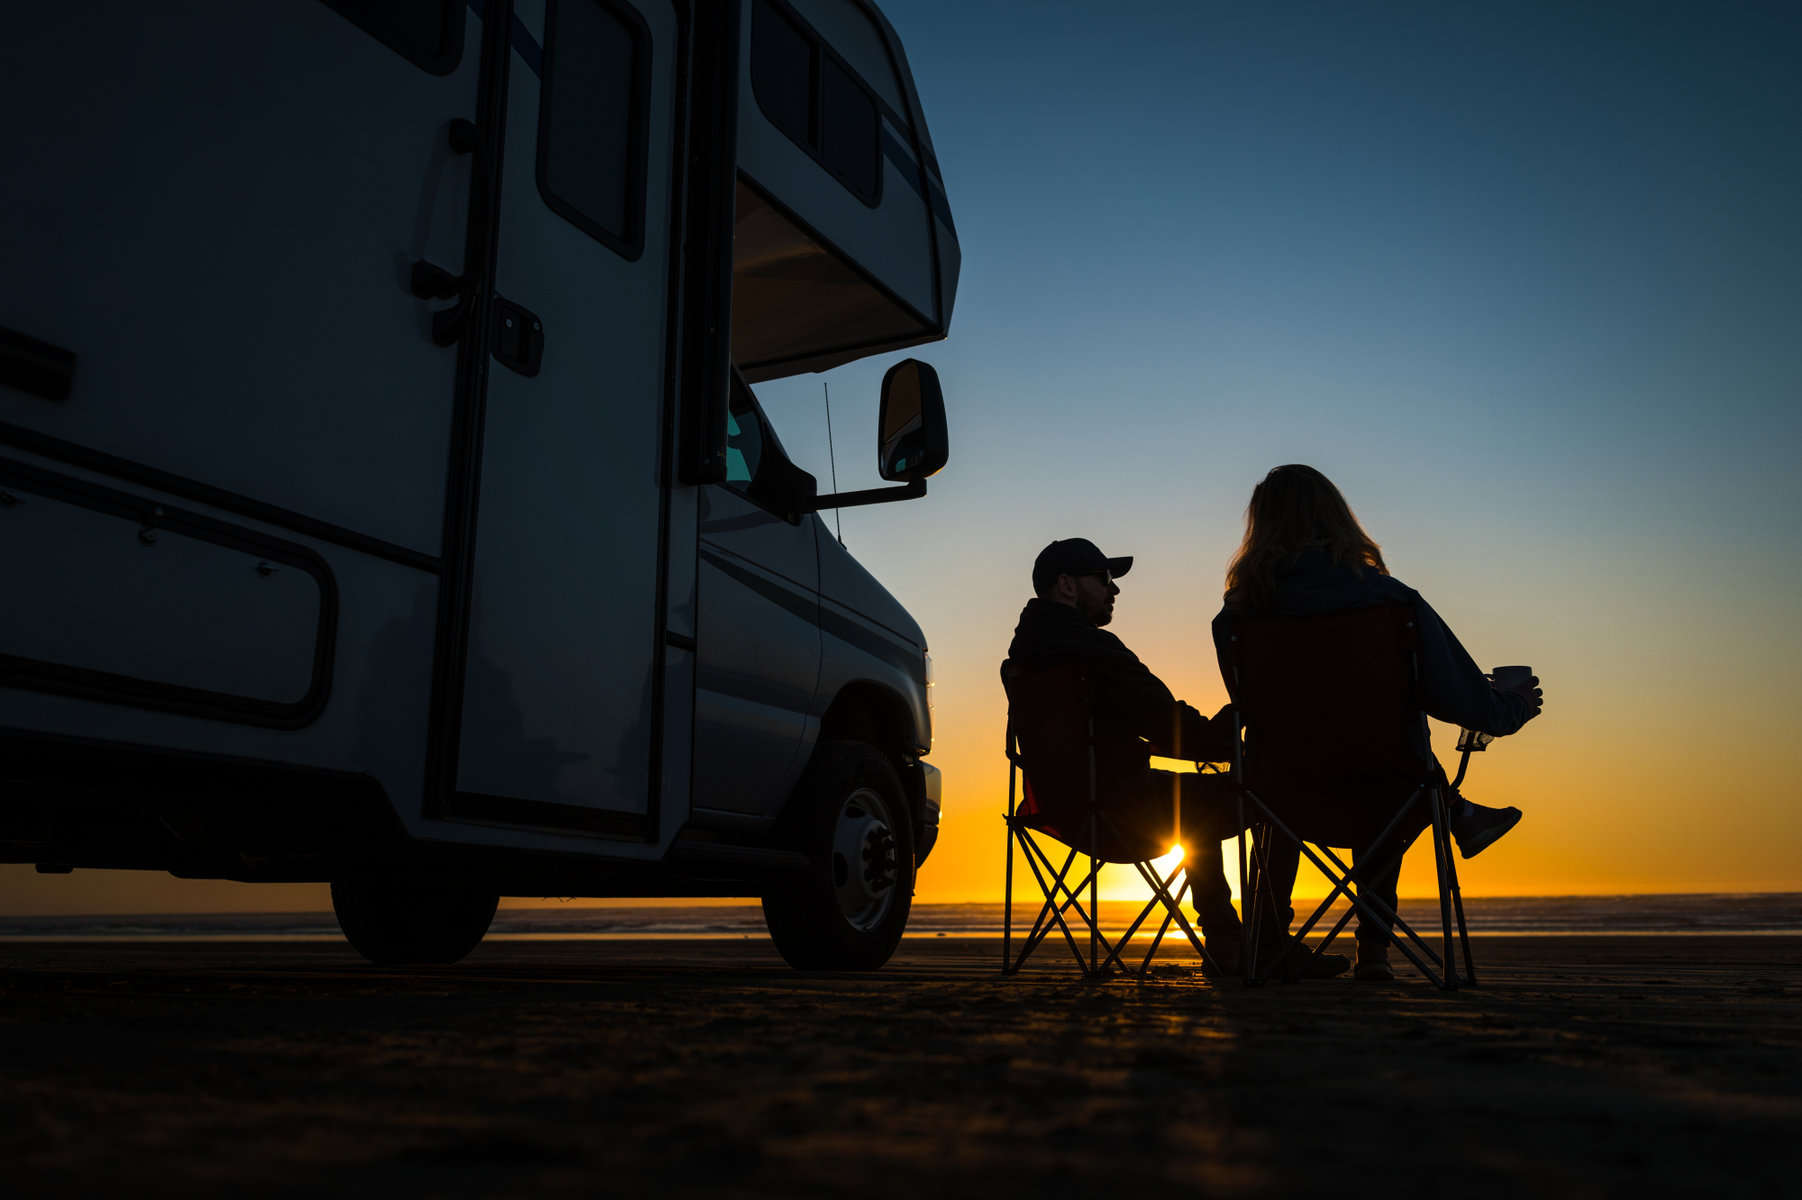 silhouette RV couple next to motorhome at sunset (Image: Shutterstock)